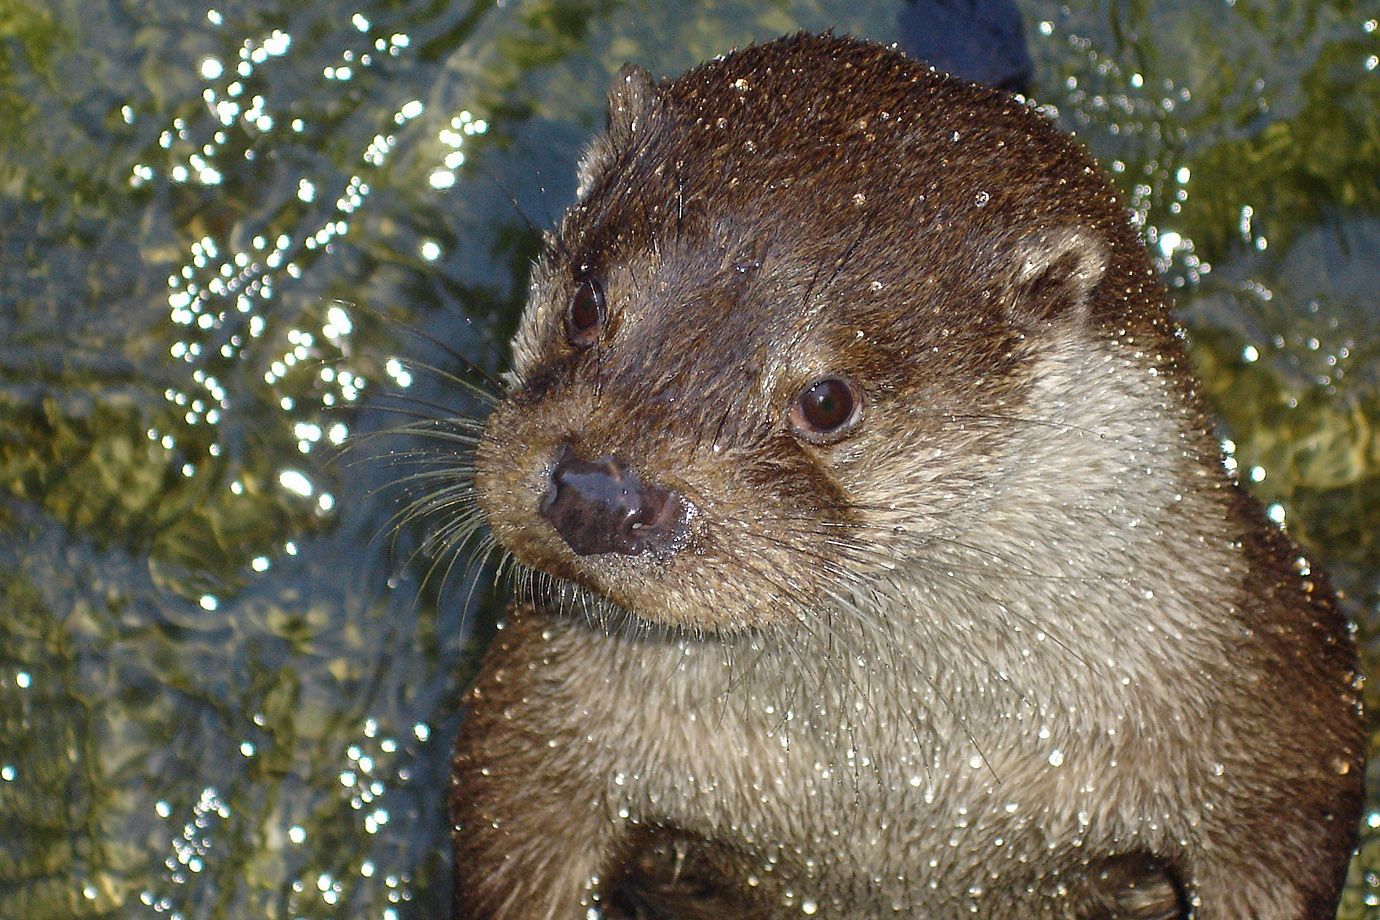 The water rolls off from the coat of the European Otter.